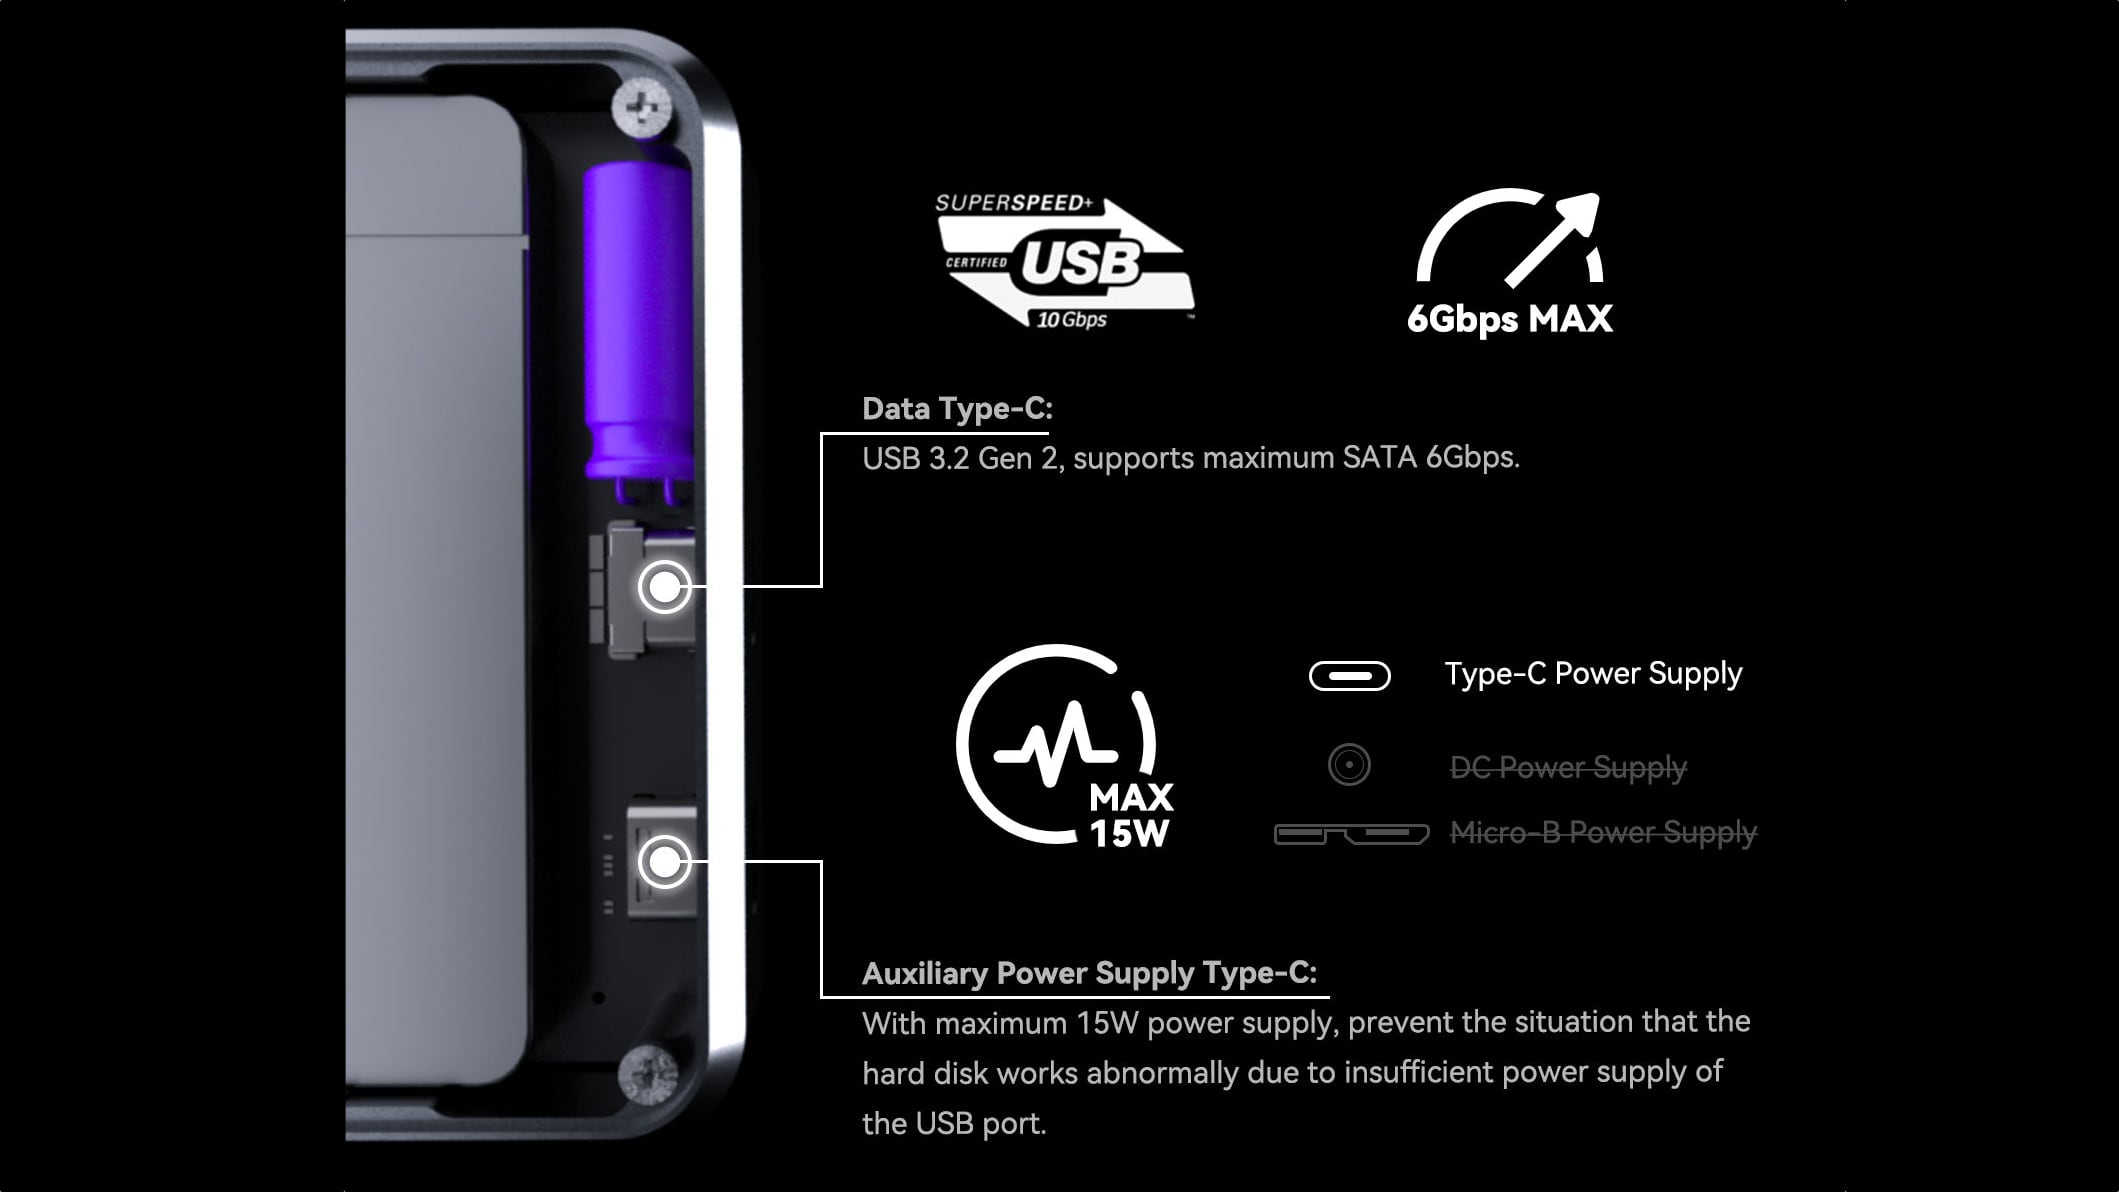 Illustration showcasing data transfer speeds and power specification of the two USB-C ports on the Dockcase enclosure